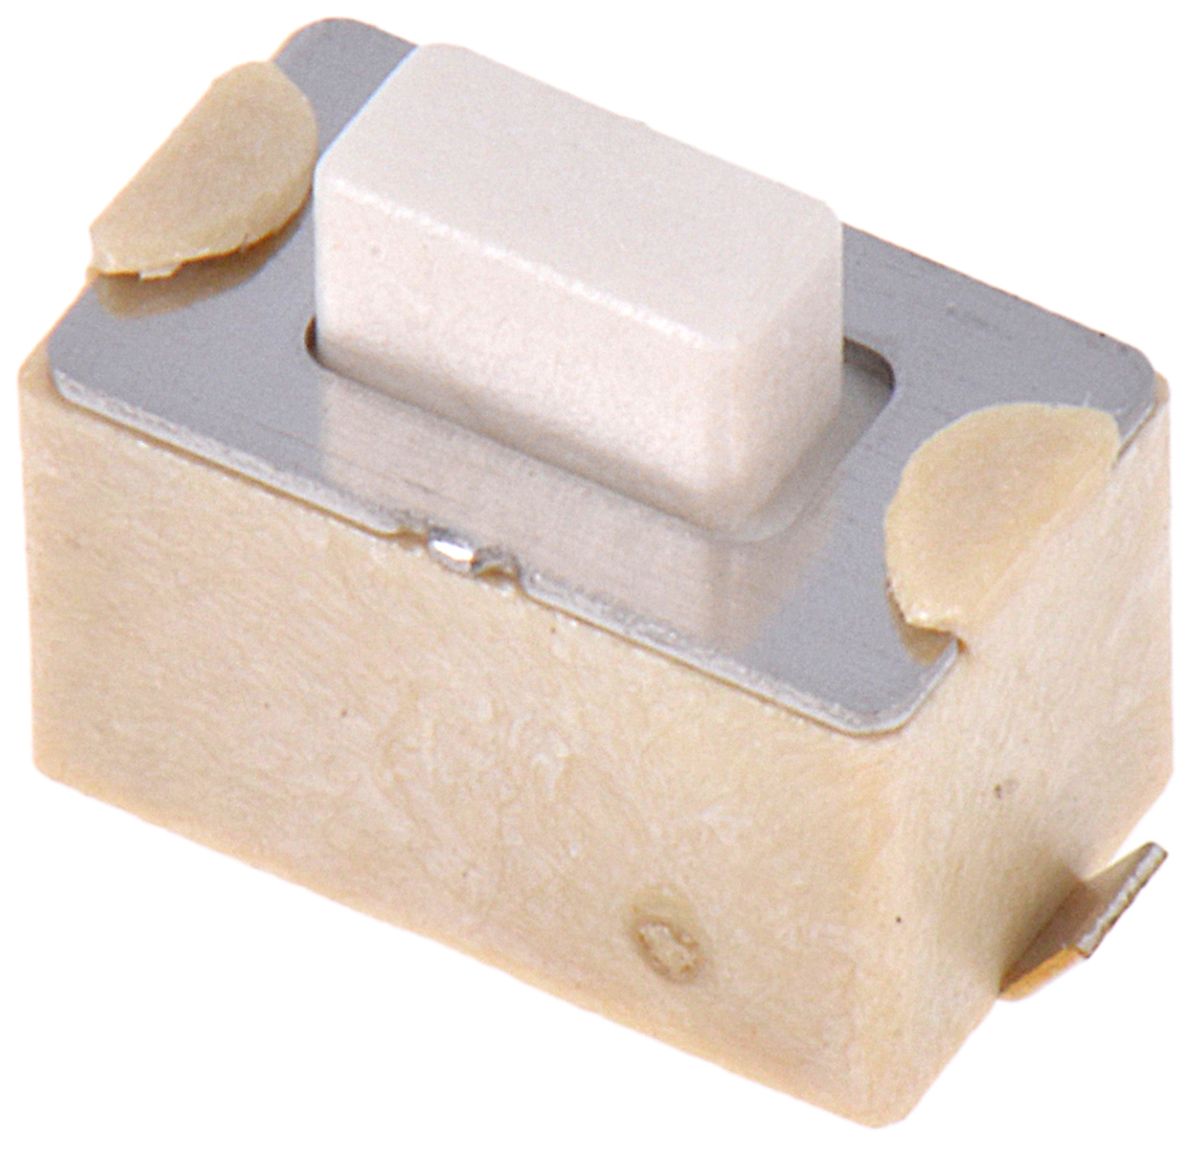 White Tactile Switch, Single Pole Single Throw (SPST) 50 mA @ 12 V dc 1.5mm Surface Mount